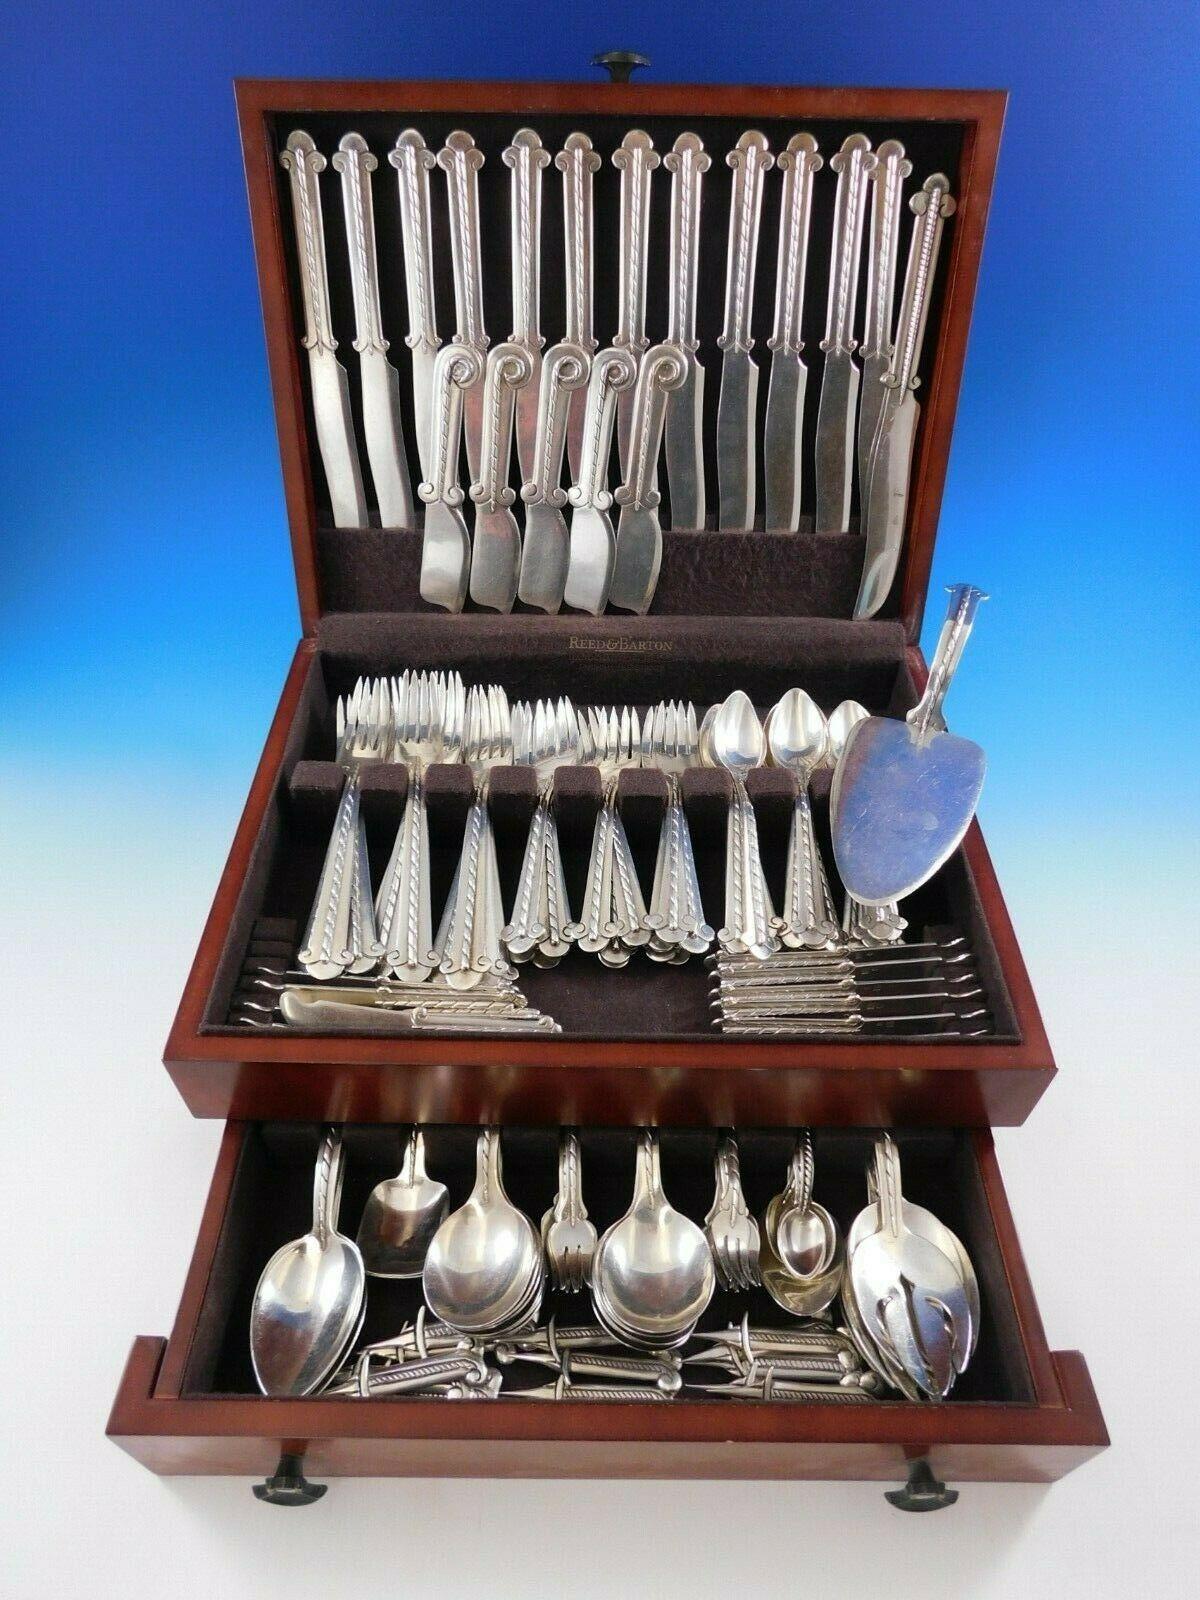 Hector Aguilar

Exceedingly rare set of circa 1940-1962 sterling silver flatware by Hector Aguilar, Taxco, Mexico in the scarce “Rope” pattern, handles decorated with a rope motif running from the trefoil bottoms to the necks. 

This superb set